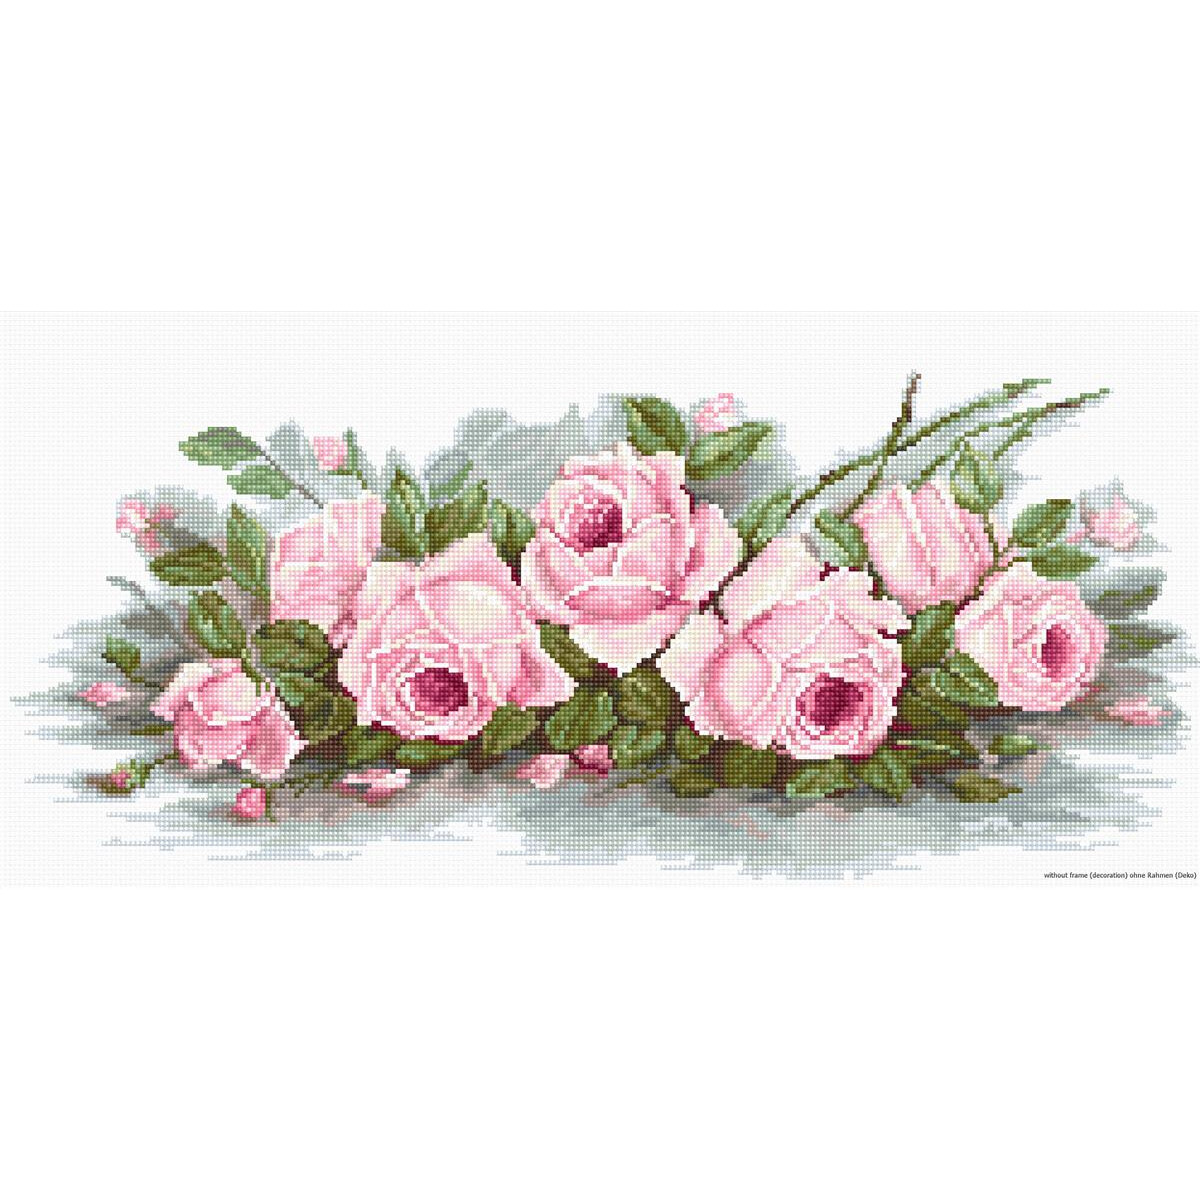 A digital illustration of a bouquet of pink roses...